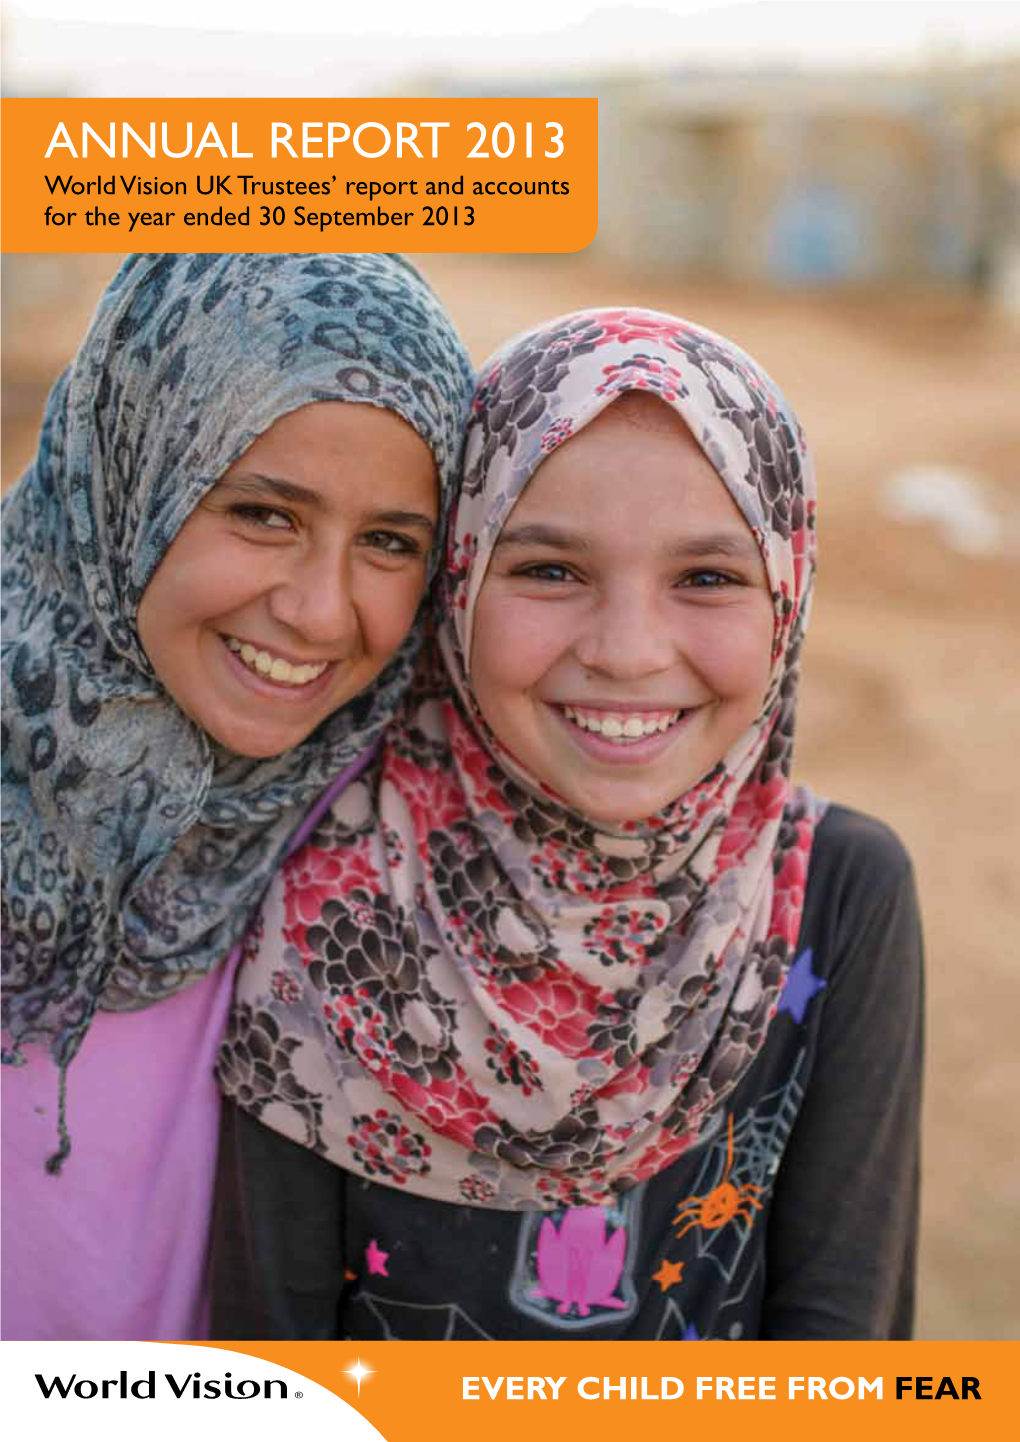 ANNUAL REPORT 2013 World Vision UK Trustees’ Report and Accounts for the Year Ended 30 September 2013